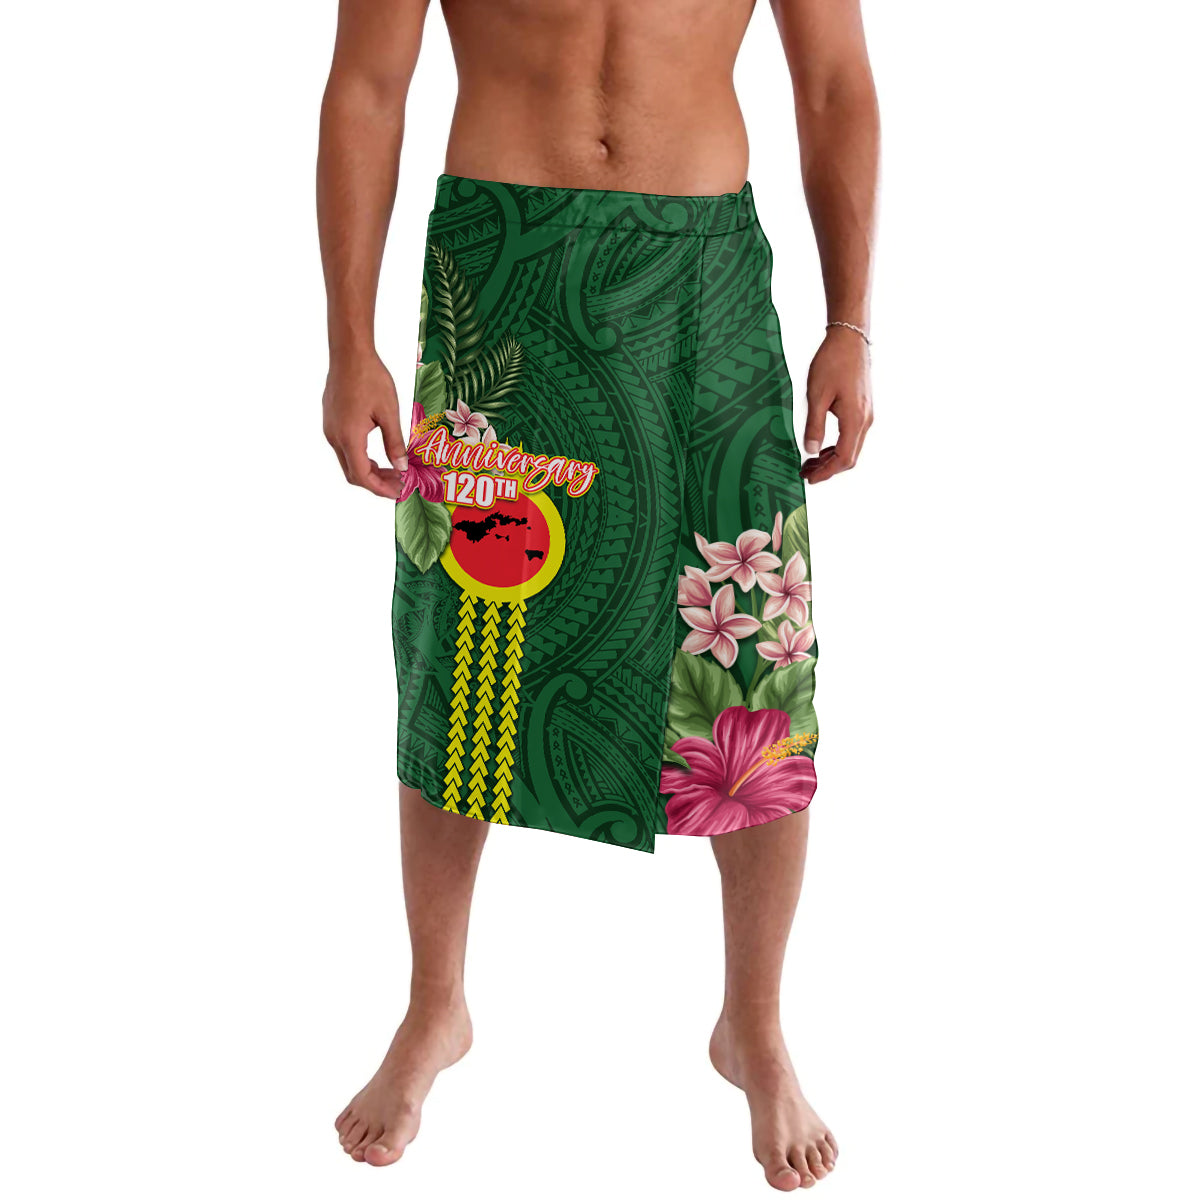 Manu'a Cession Day 120th Anniversary Lavalava Polynesian Pattern and Hibiscus Flower